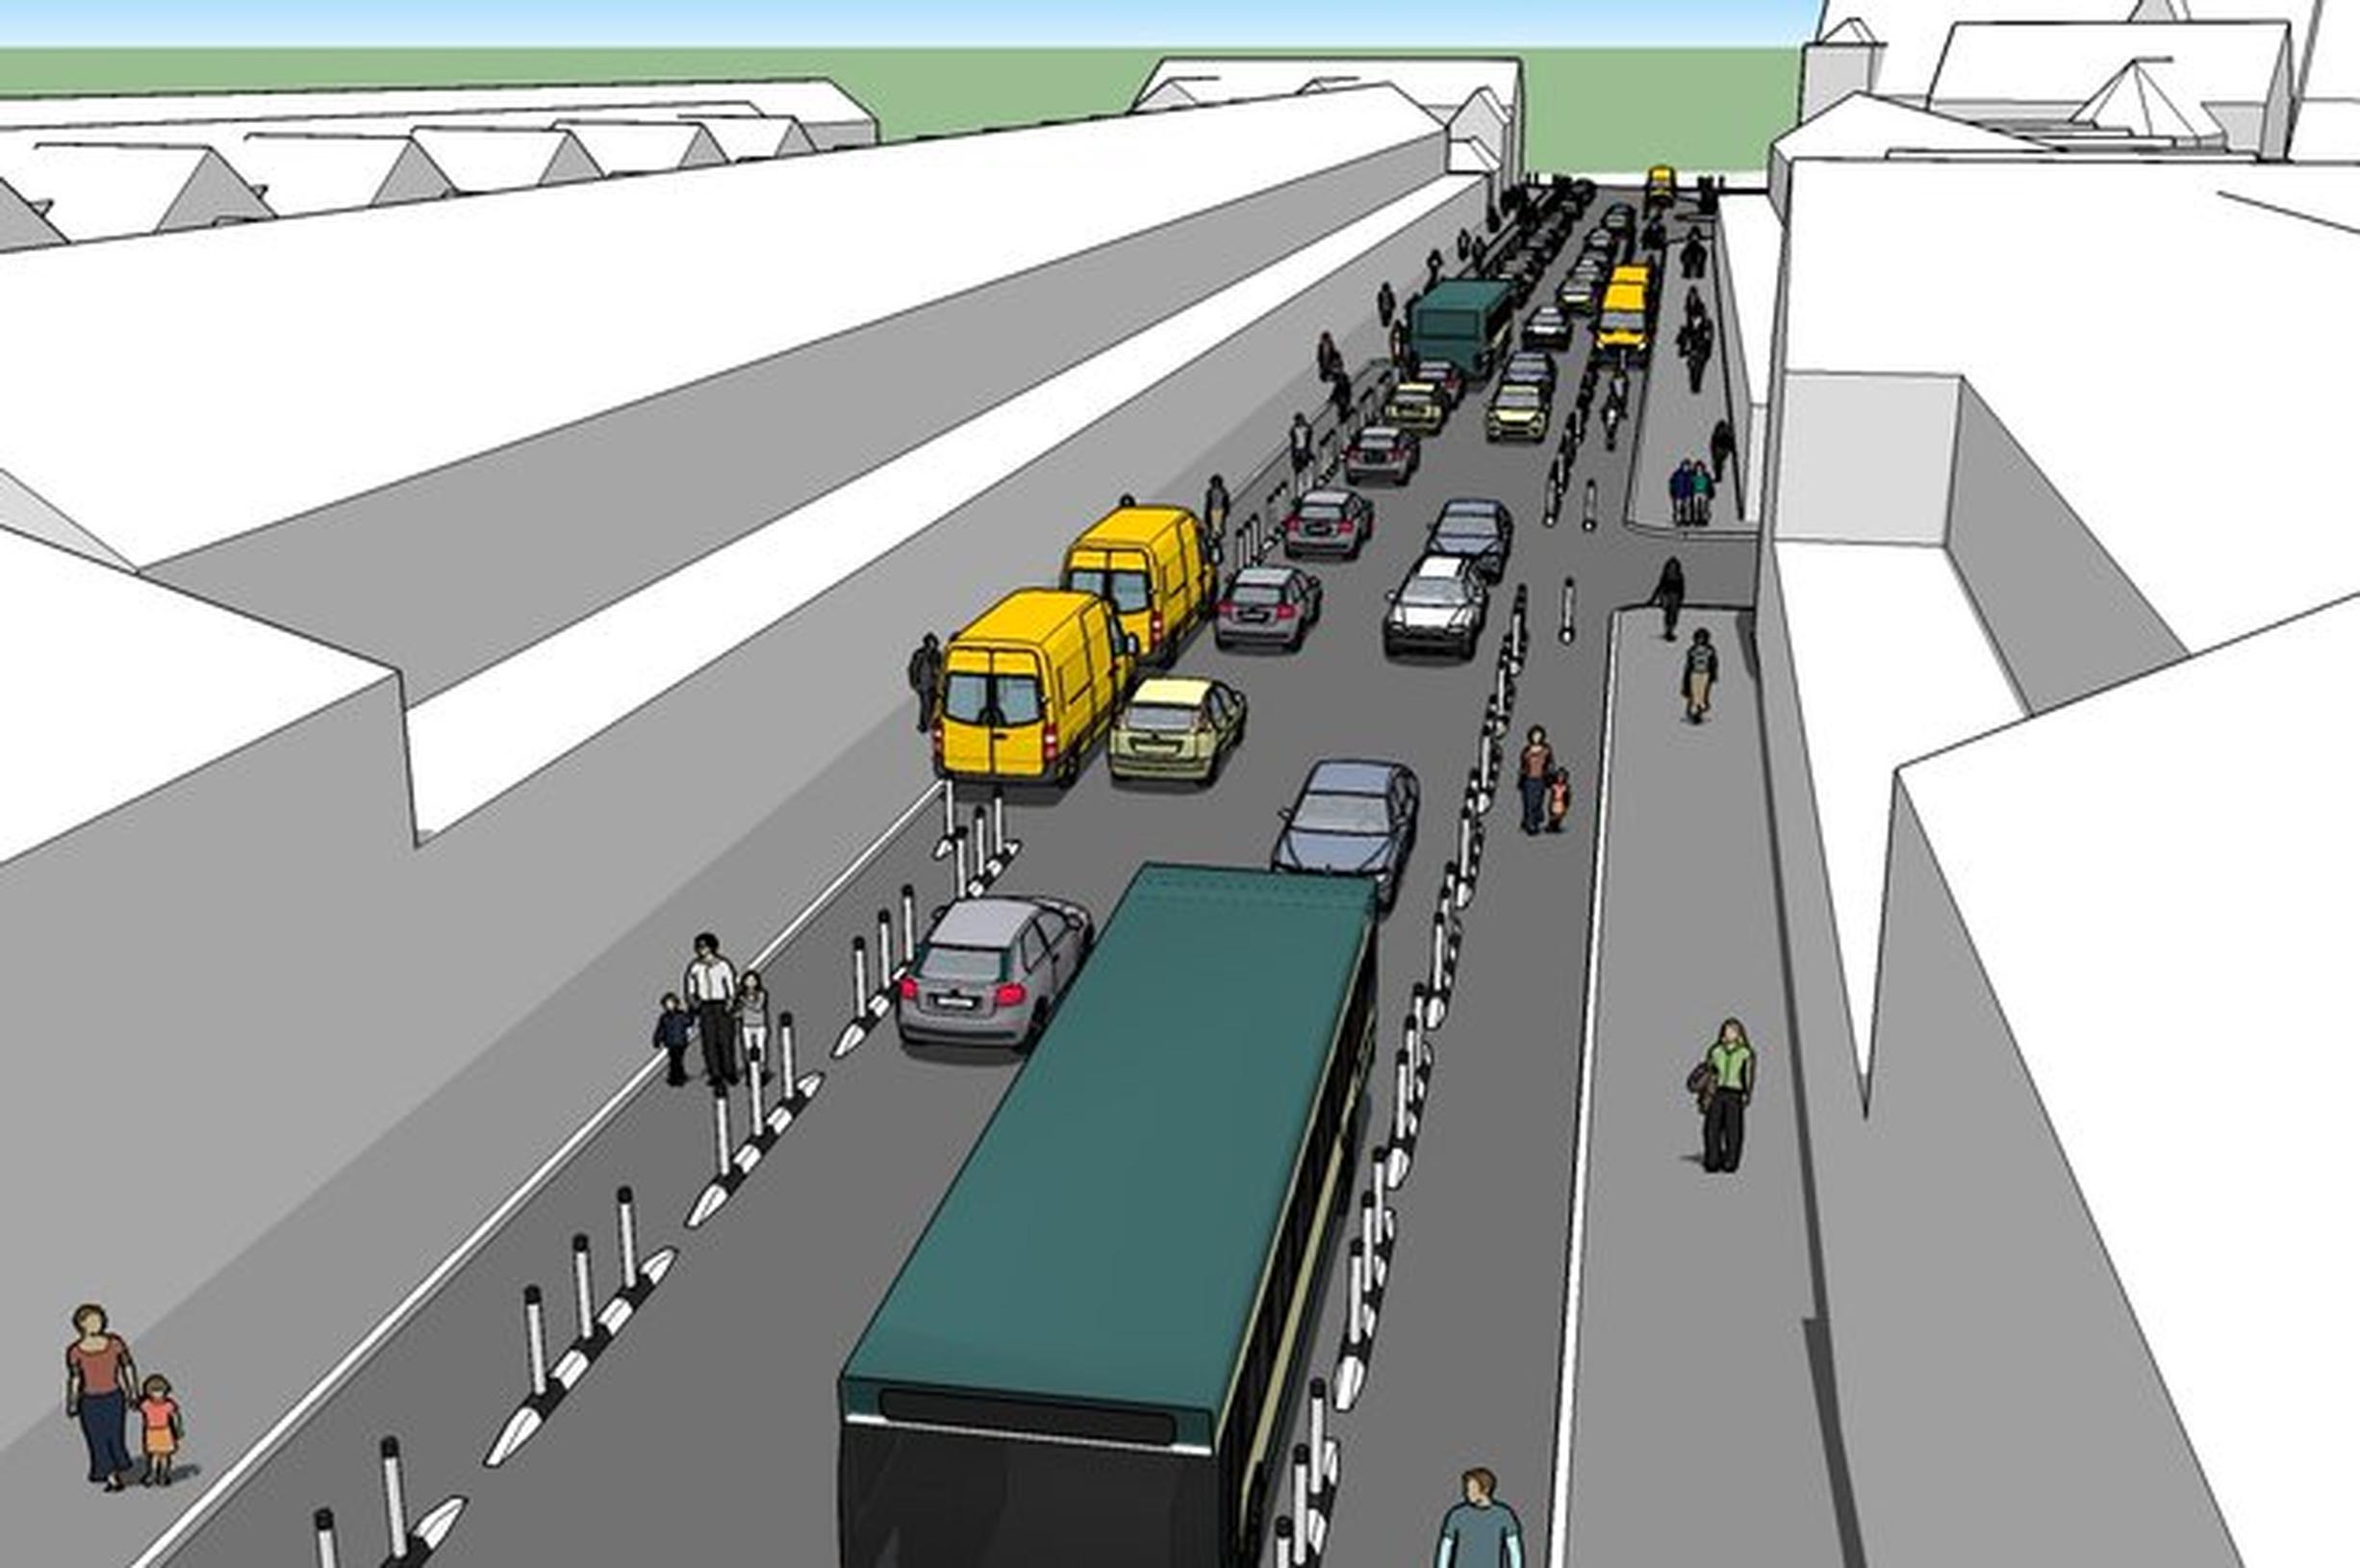 A vision of how Cardiff`s streets can be made safer for pedestrians and cyclists during the pandemic